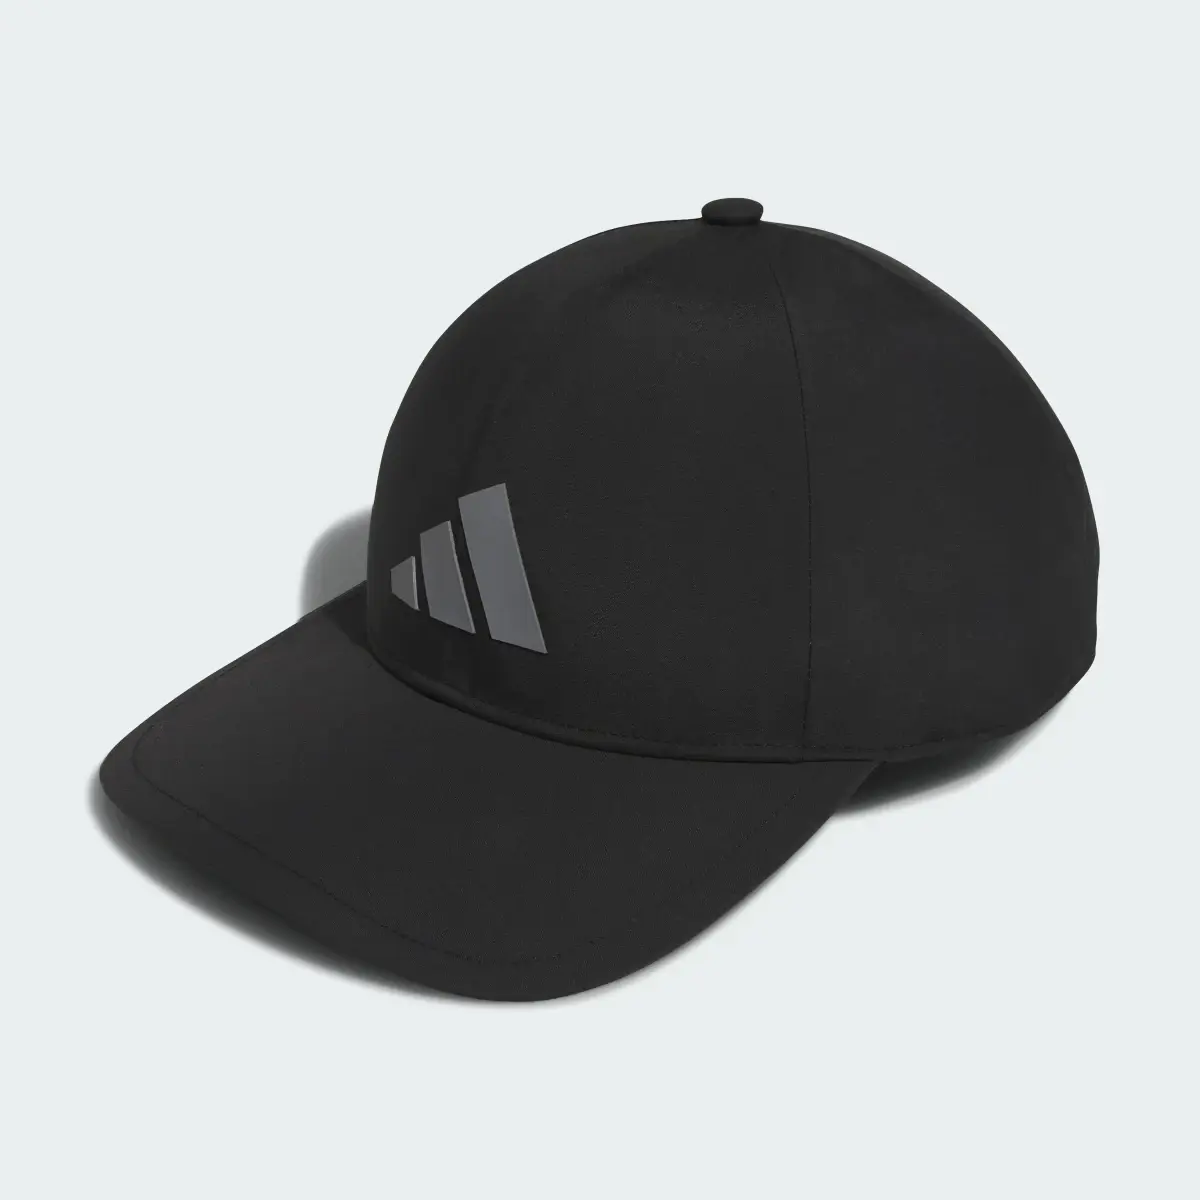 Adidas Casquette Stormy. 2